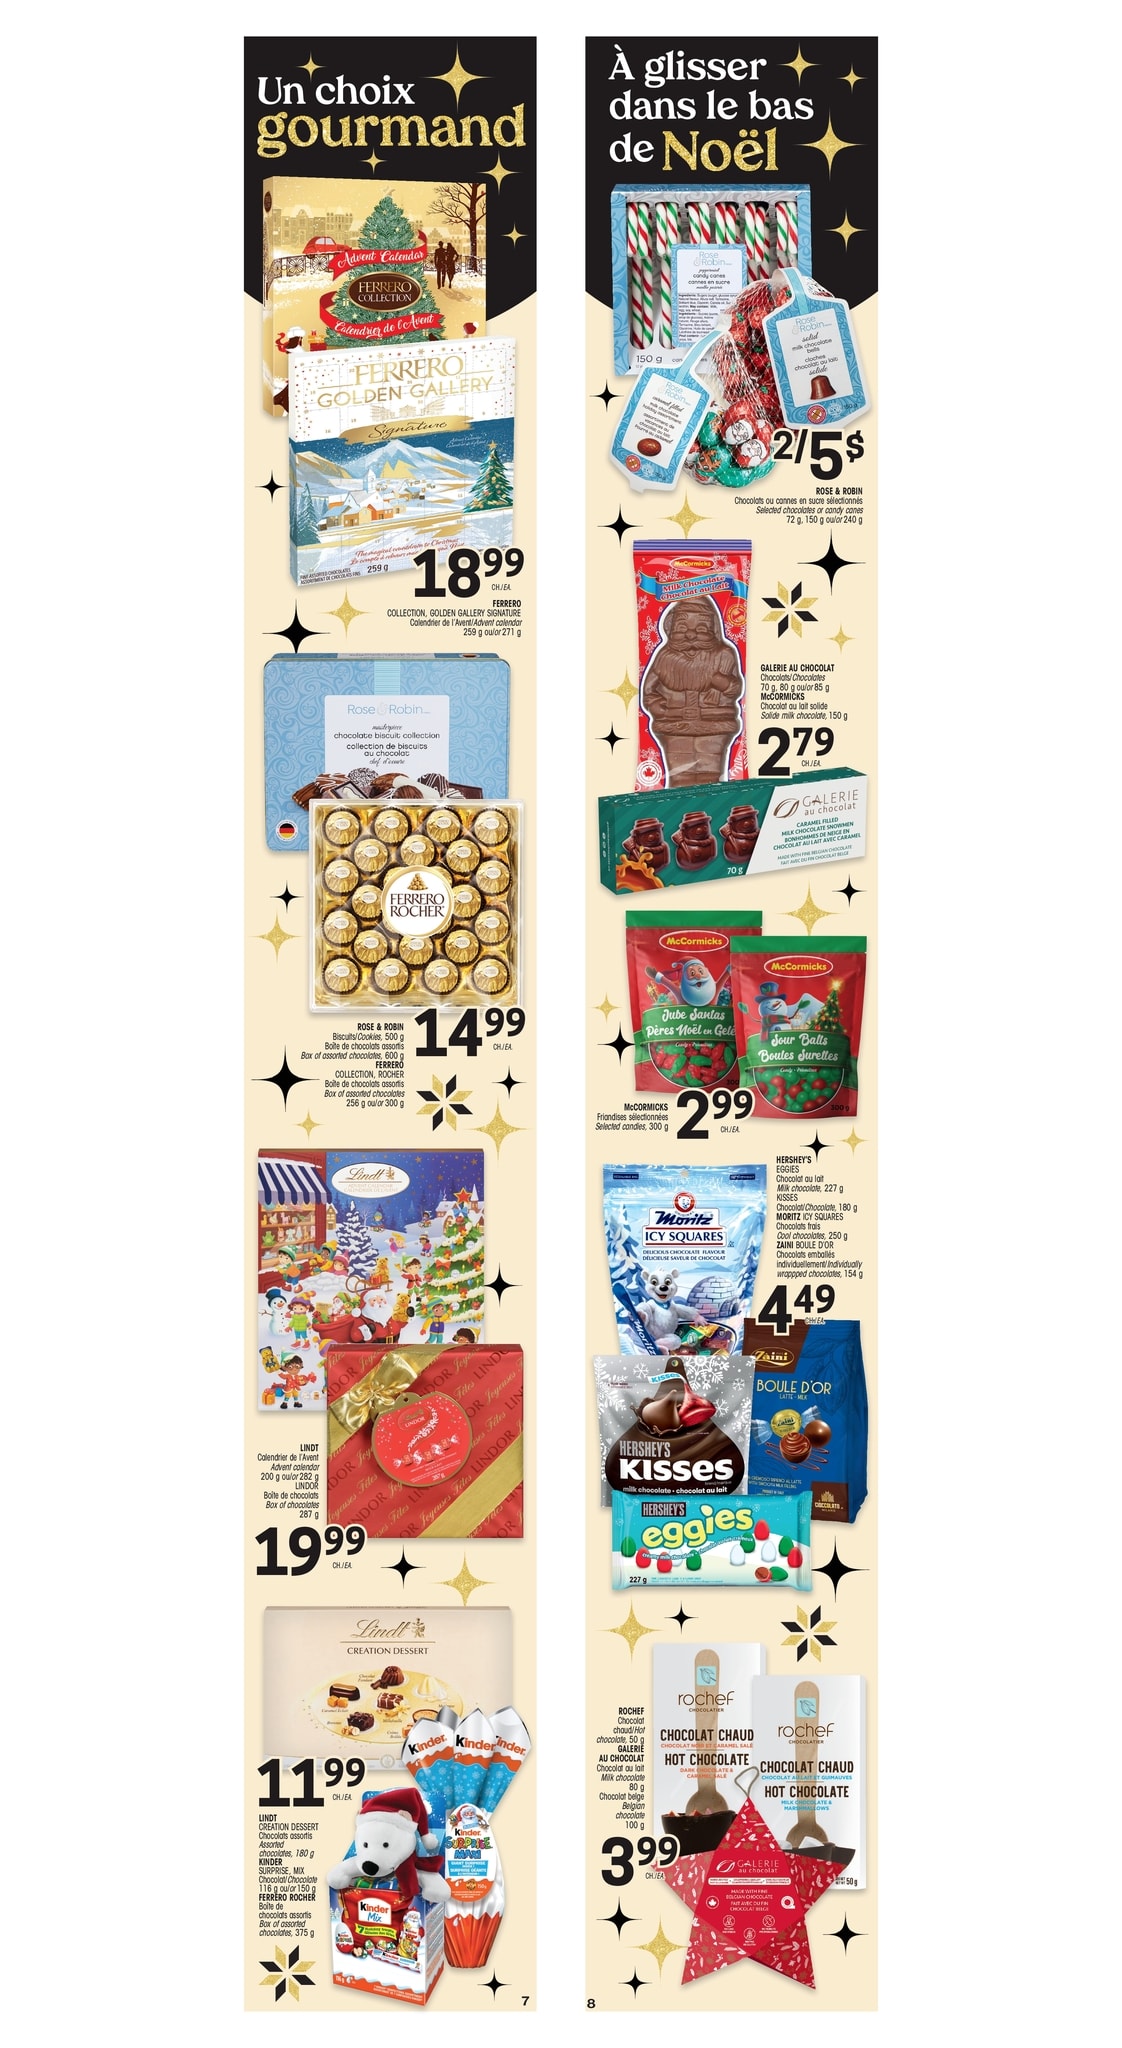 Uniprix - Weekly Flyer Specials - Page 7